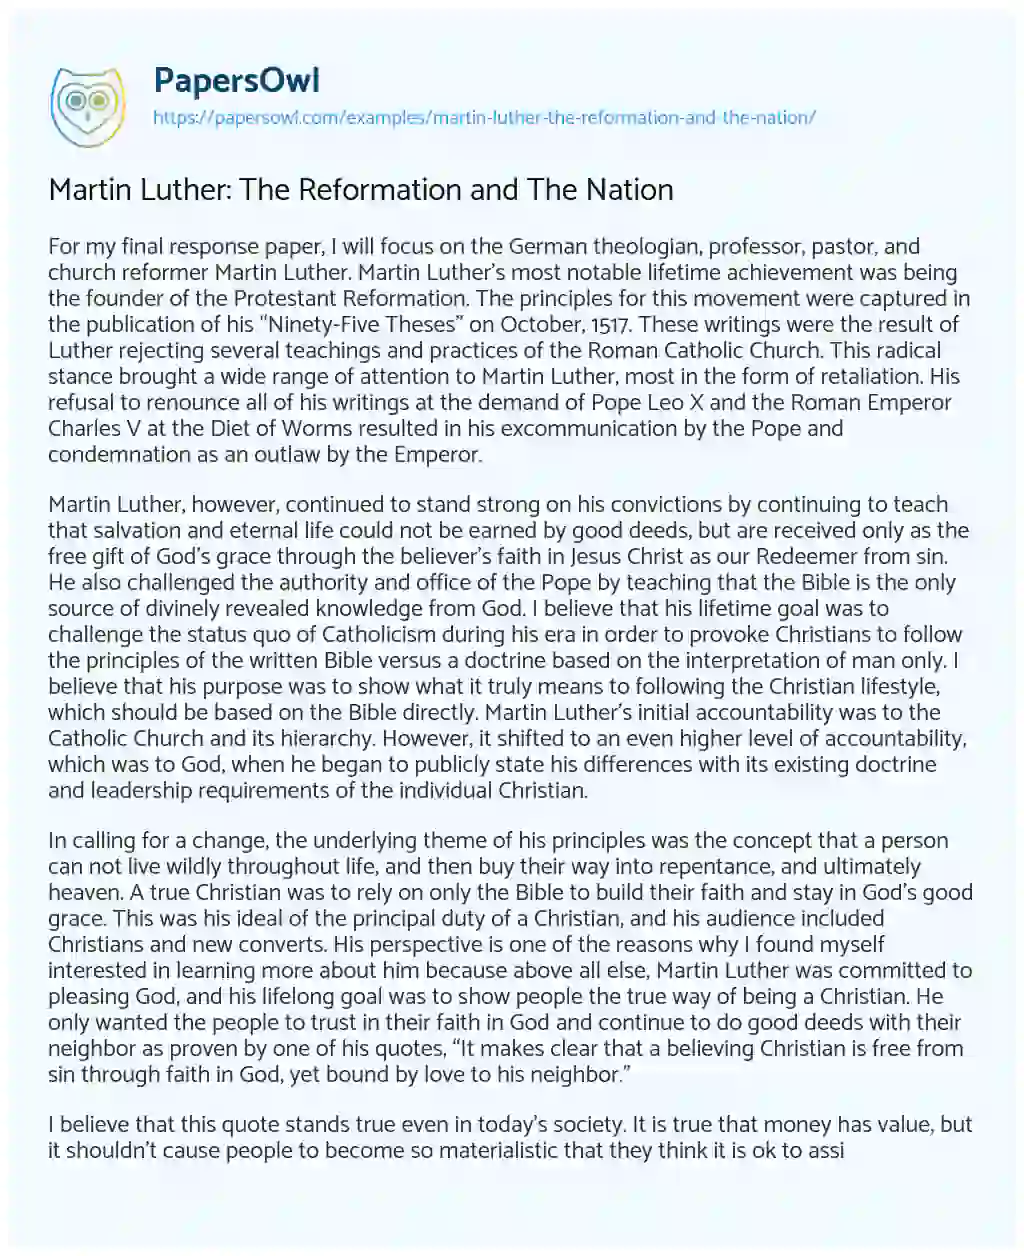 Essay on Martin Luther: the Reformation and the Nation